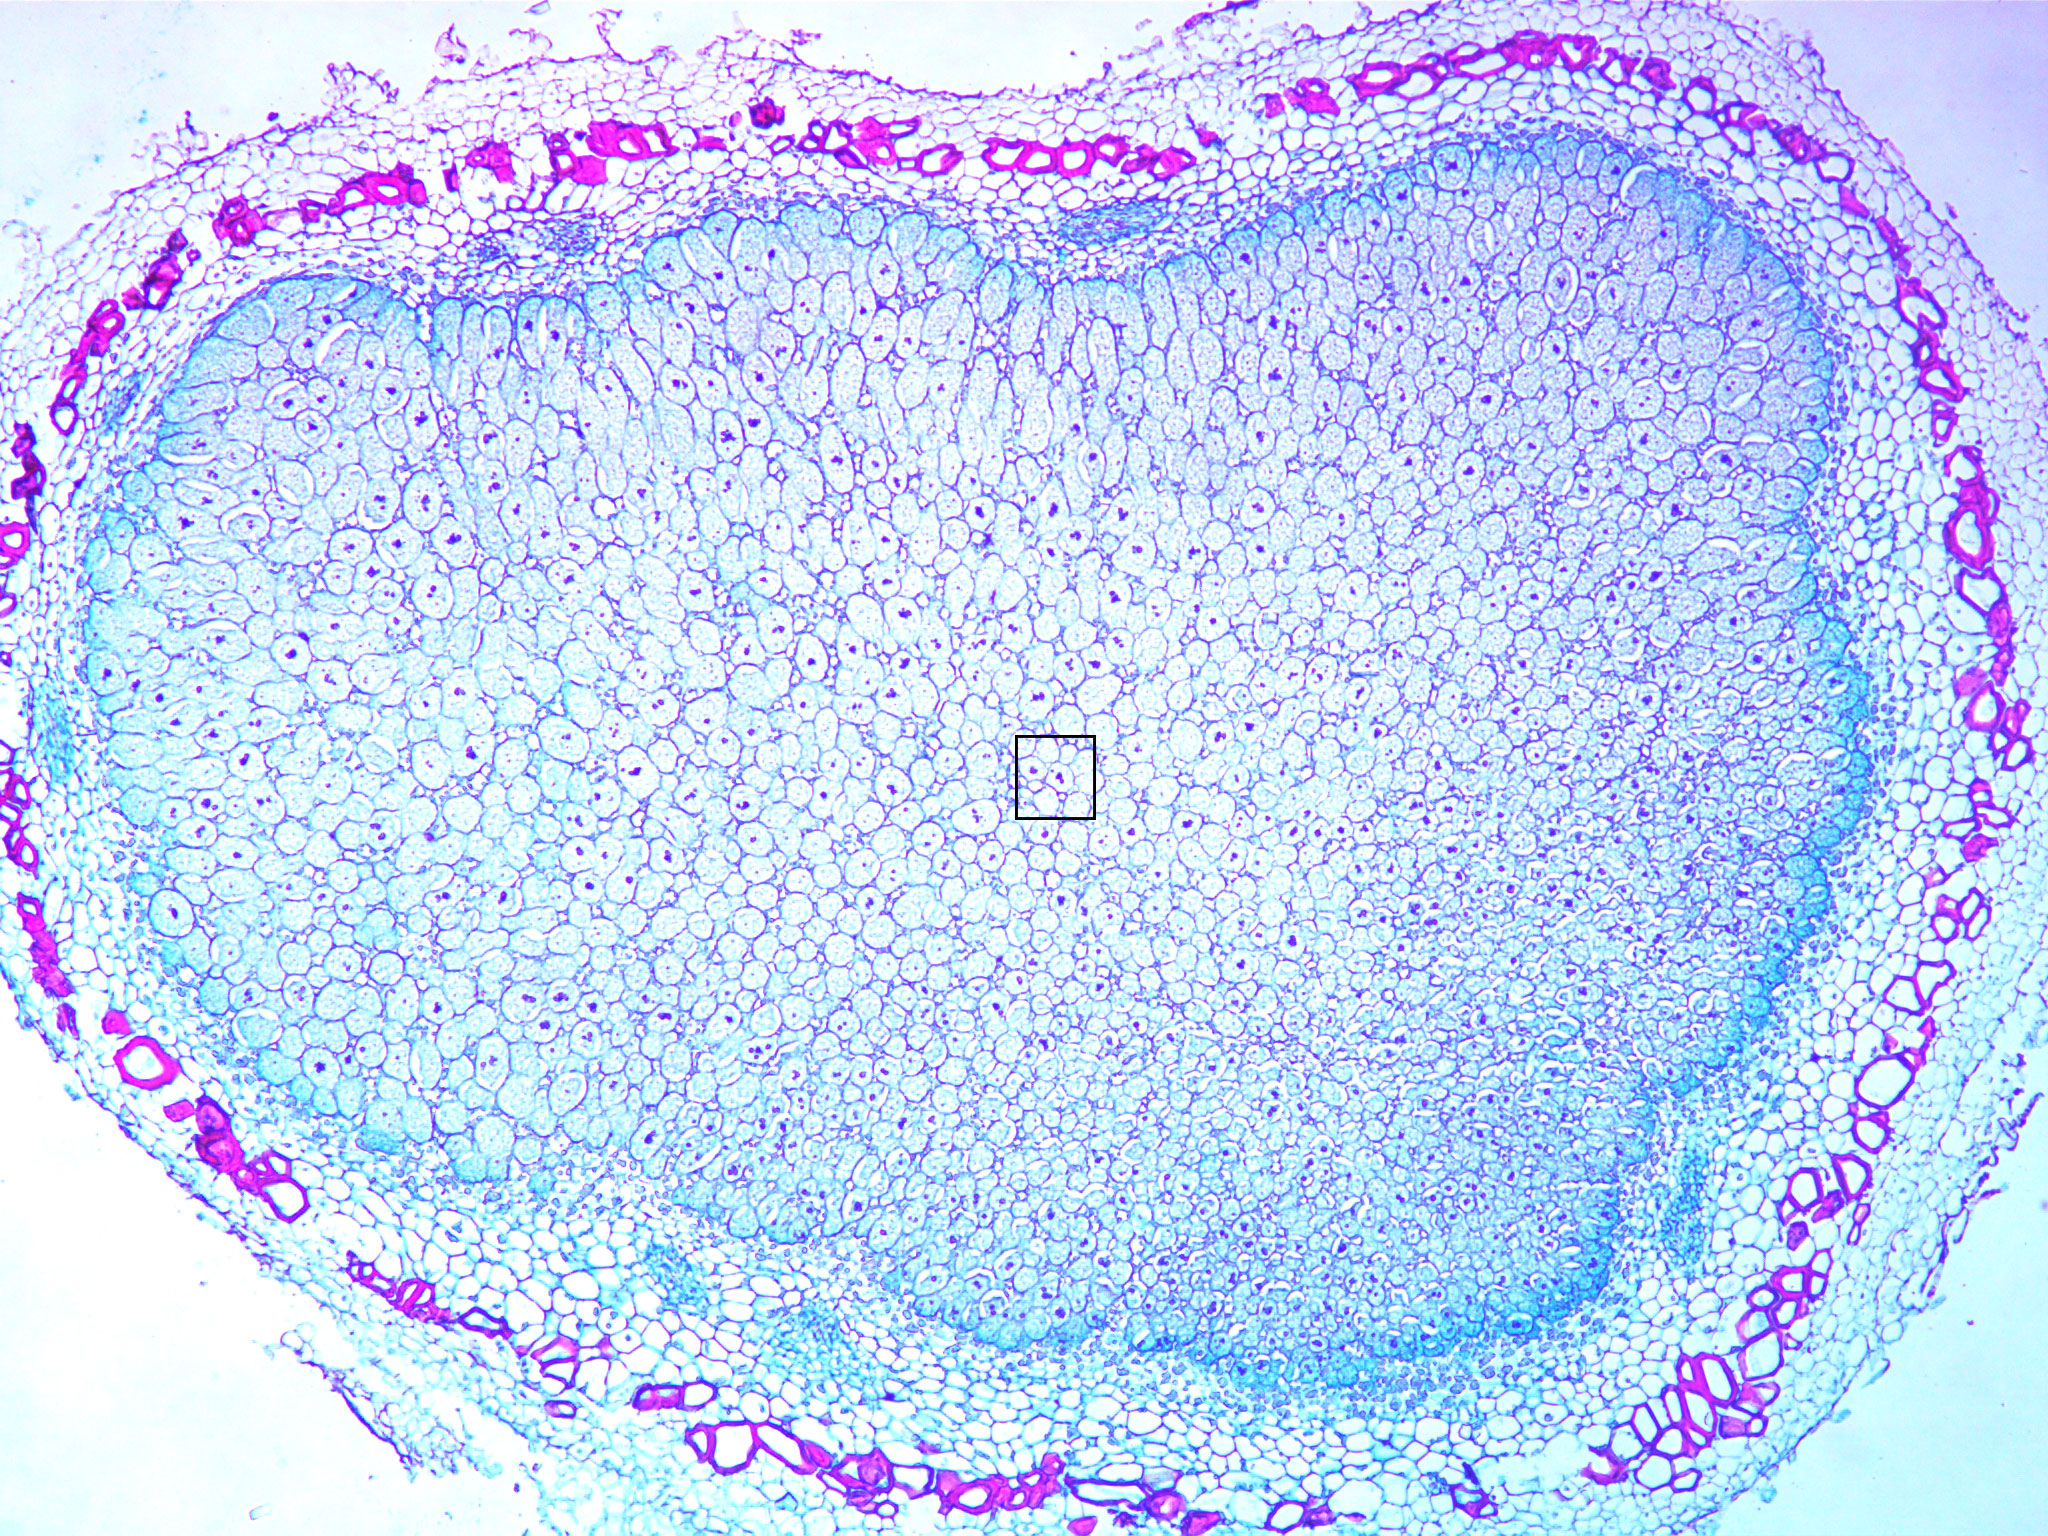 Low magnification soybean root nodule cross section (40X total magnification)